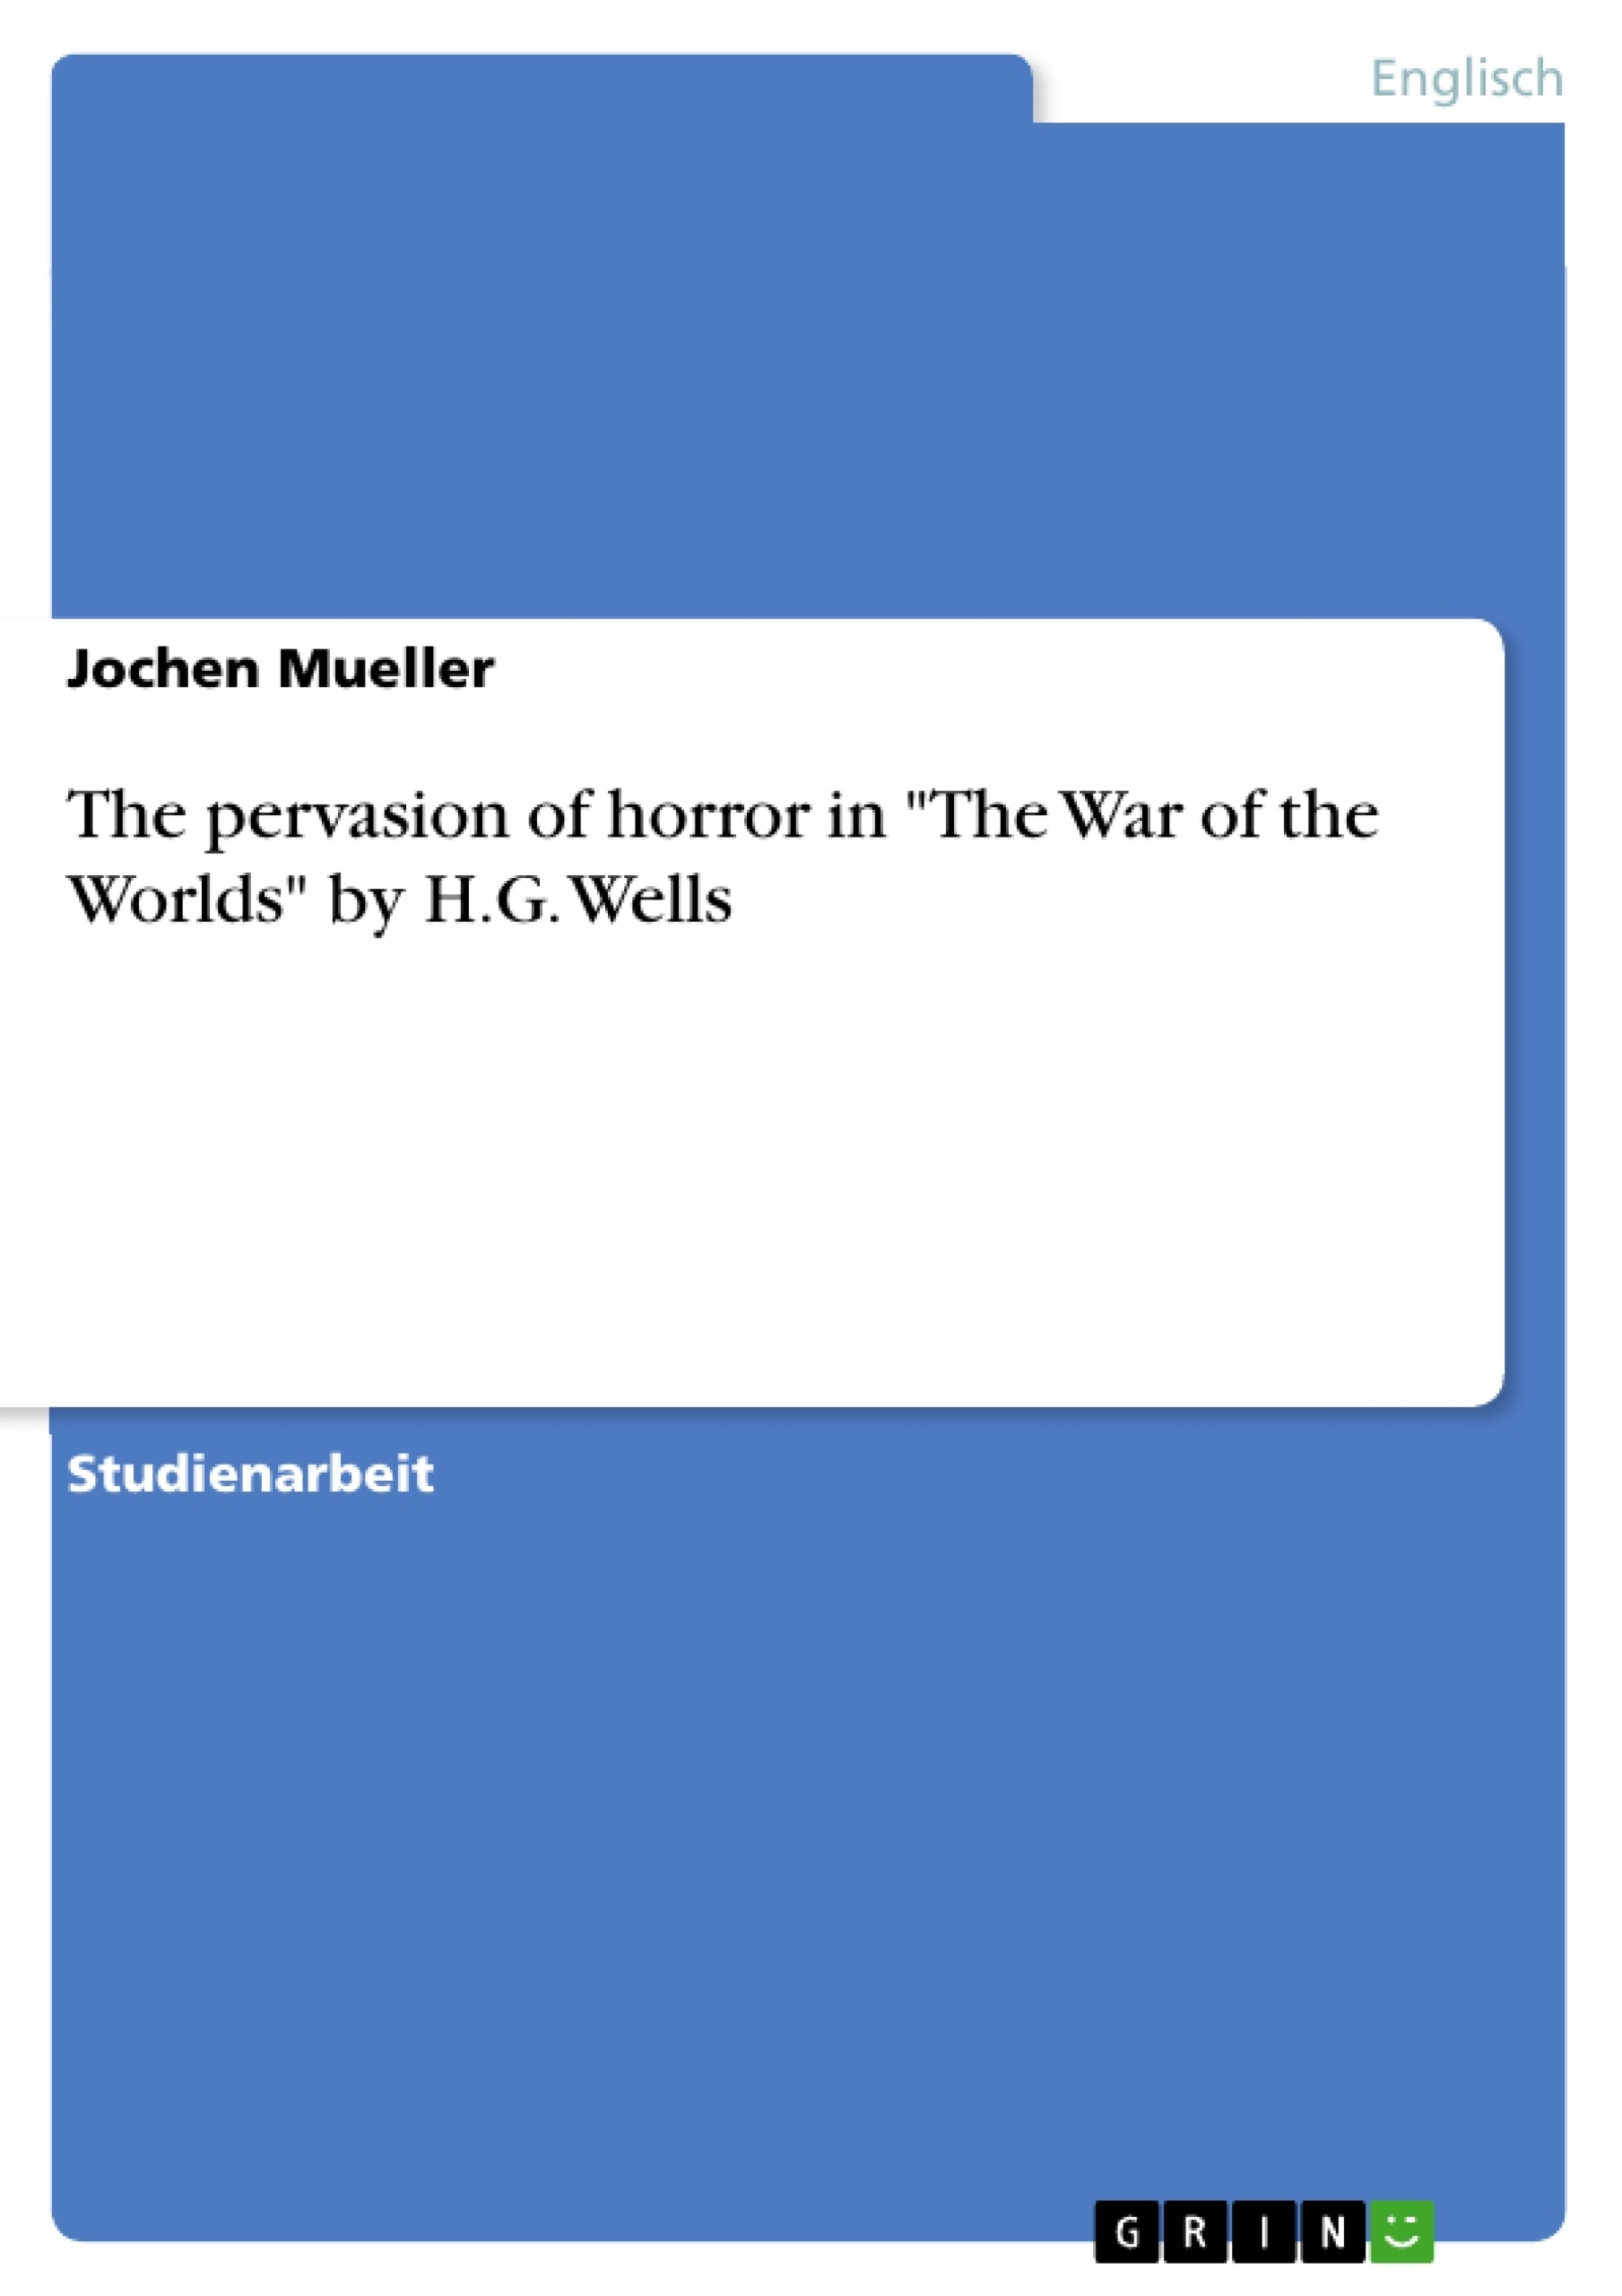 Title: The pervasion of horror in "The War of the Worlds" by H.G. Wells